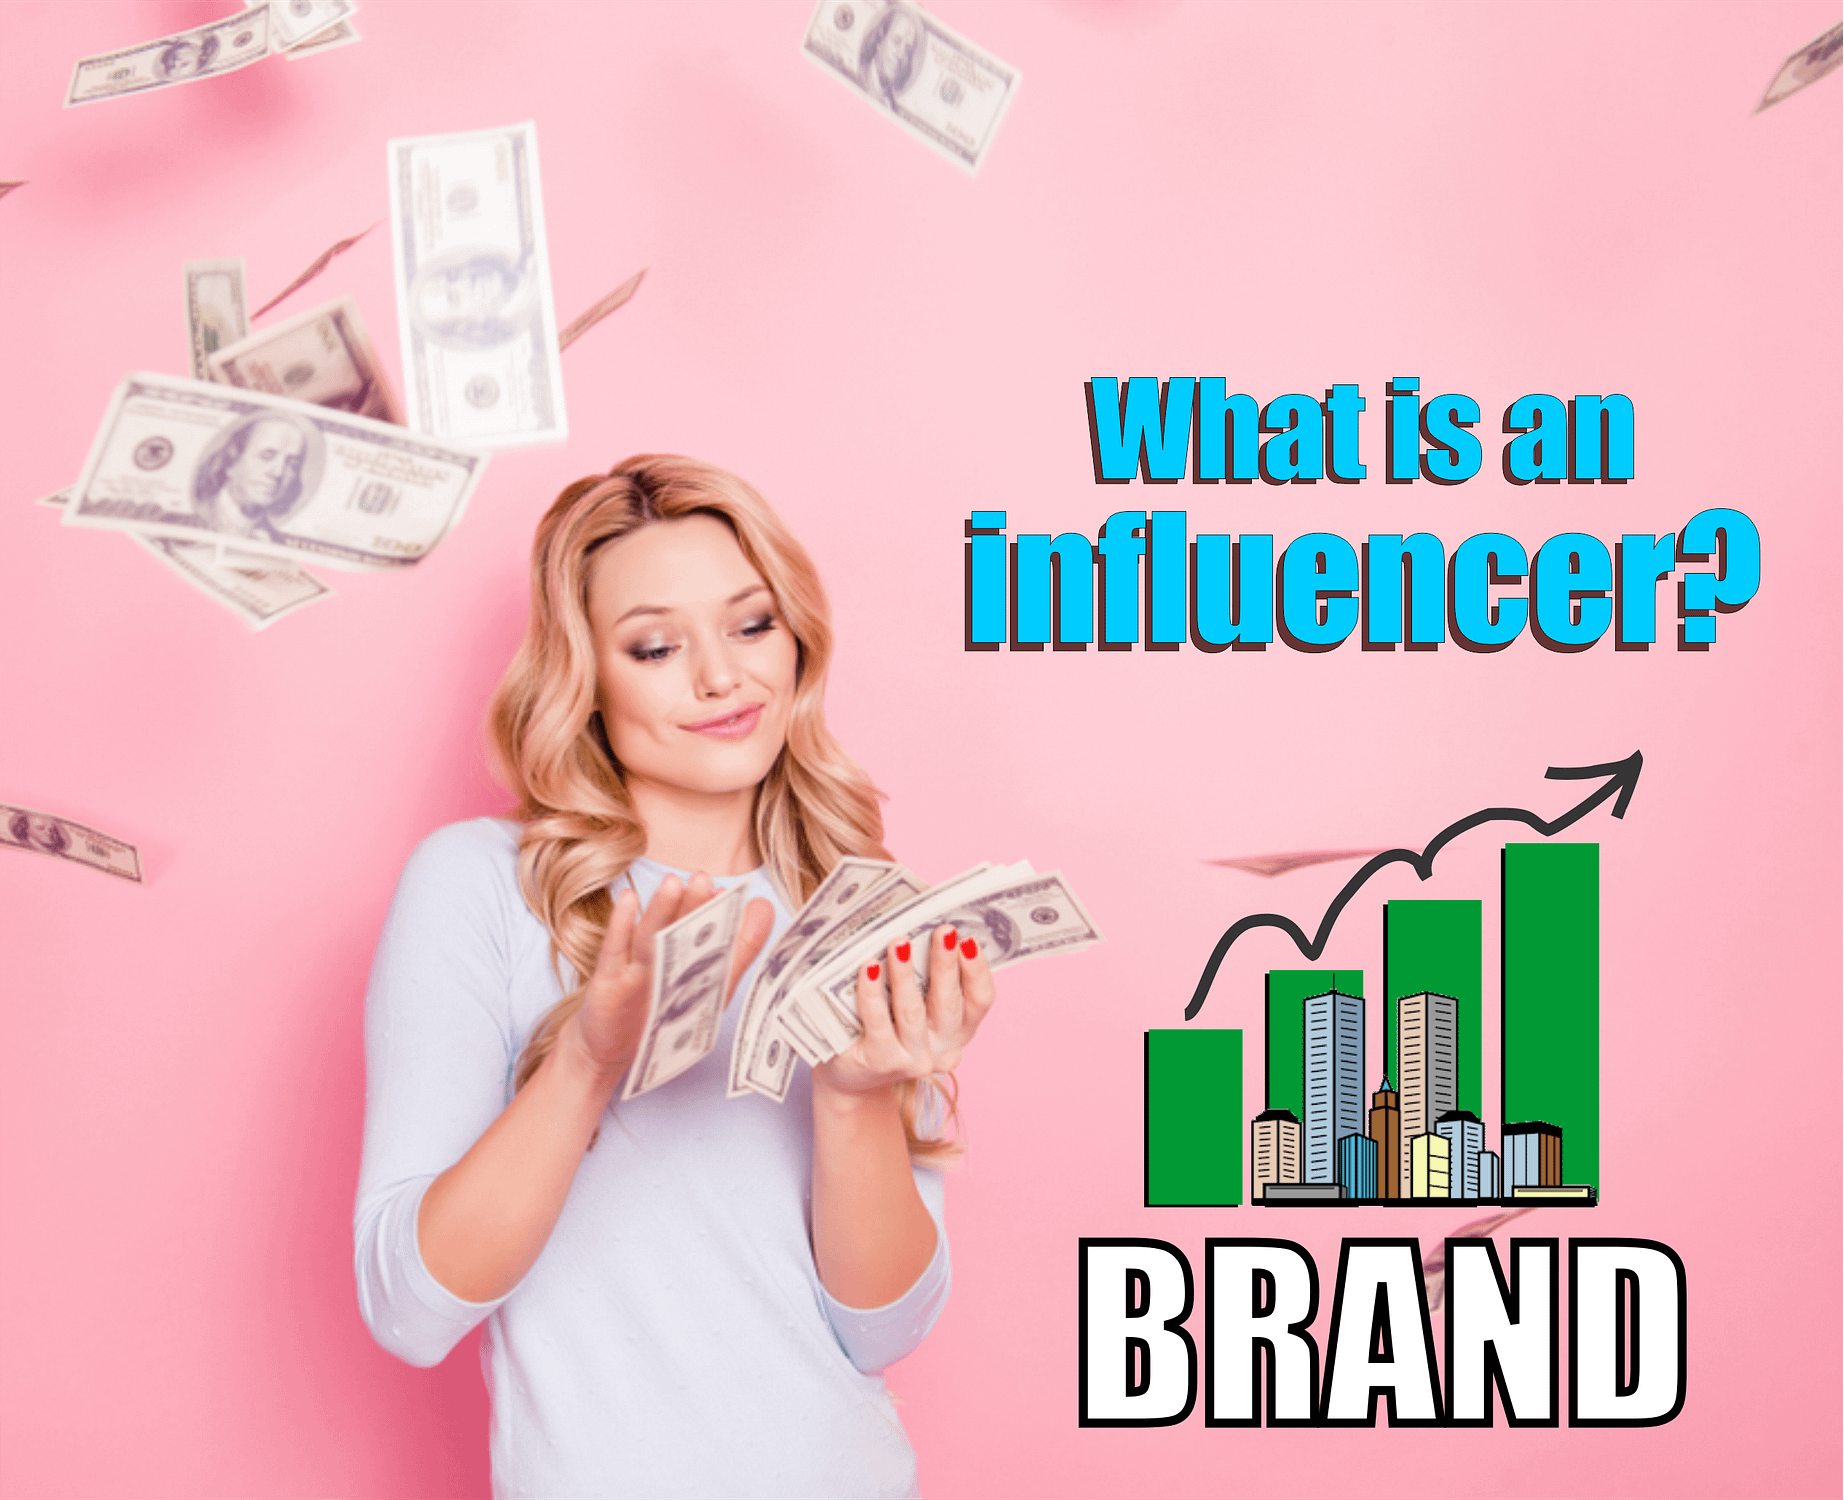 What is an influencer